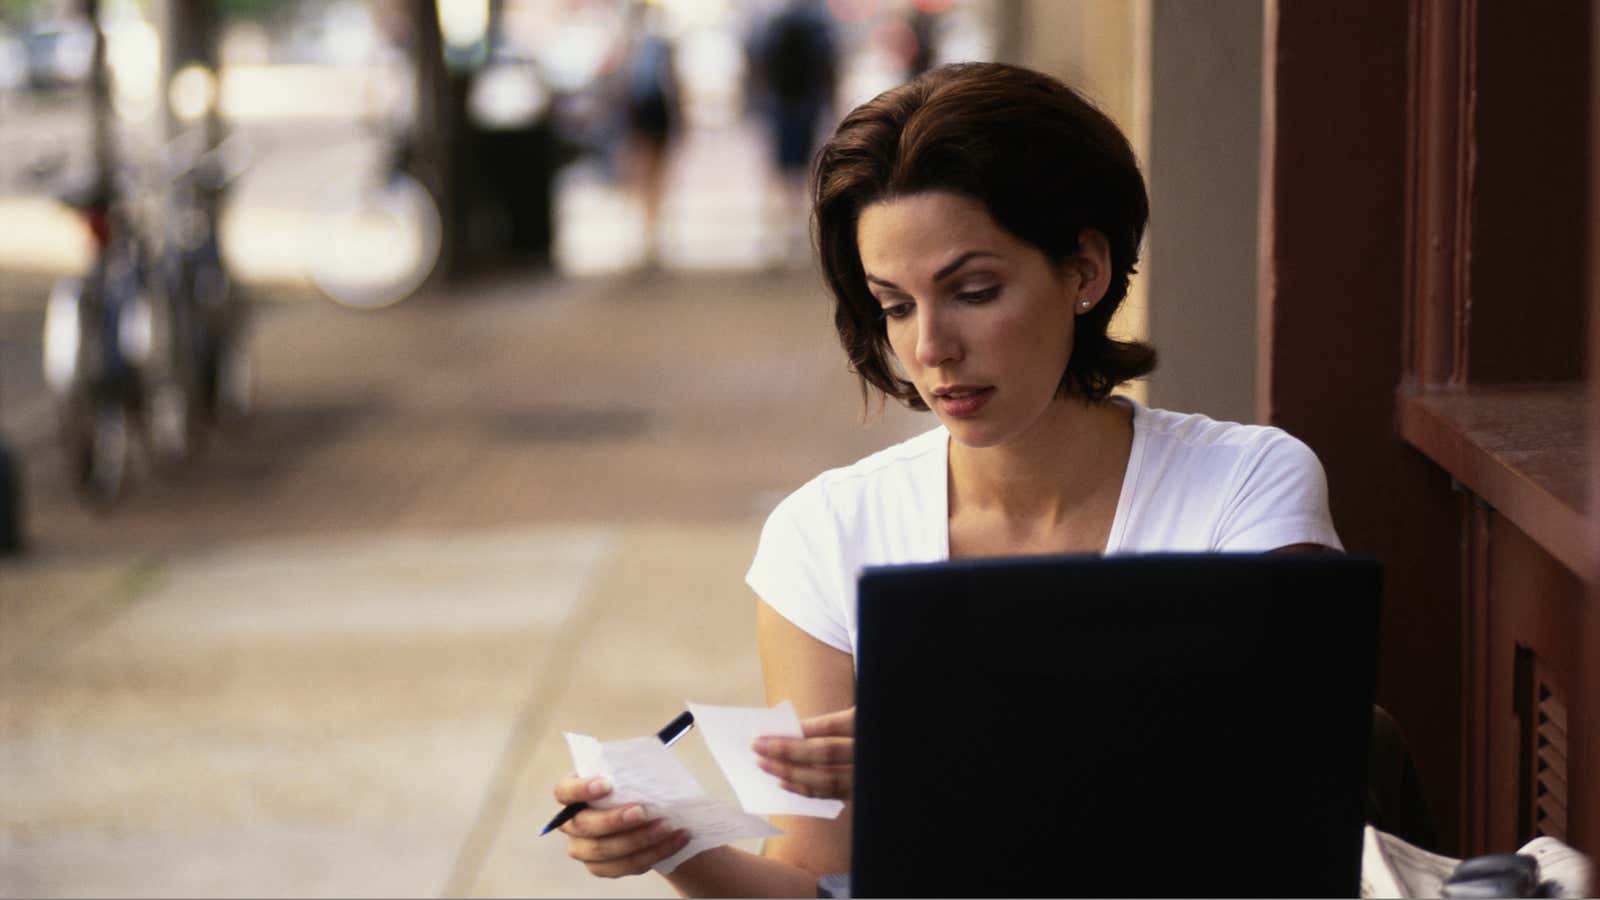 Businesswoman working at sidewalk cafe with laptop